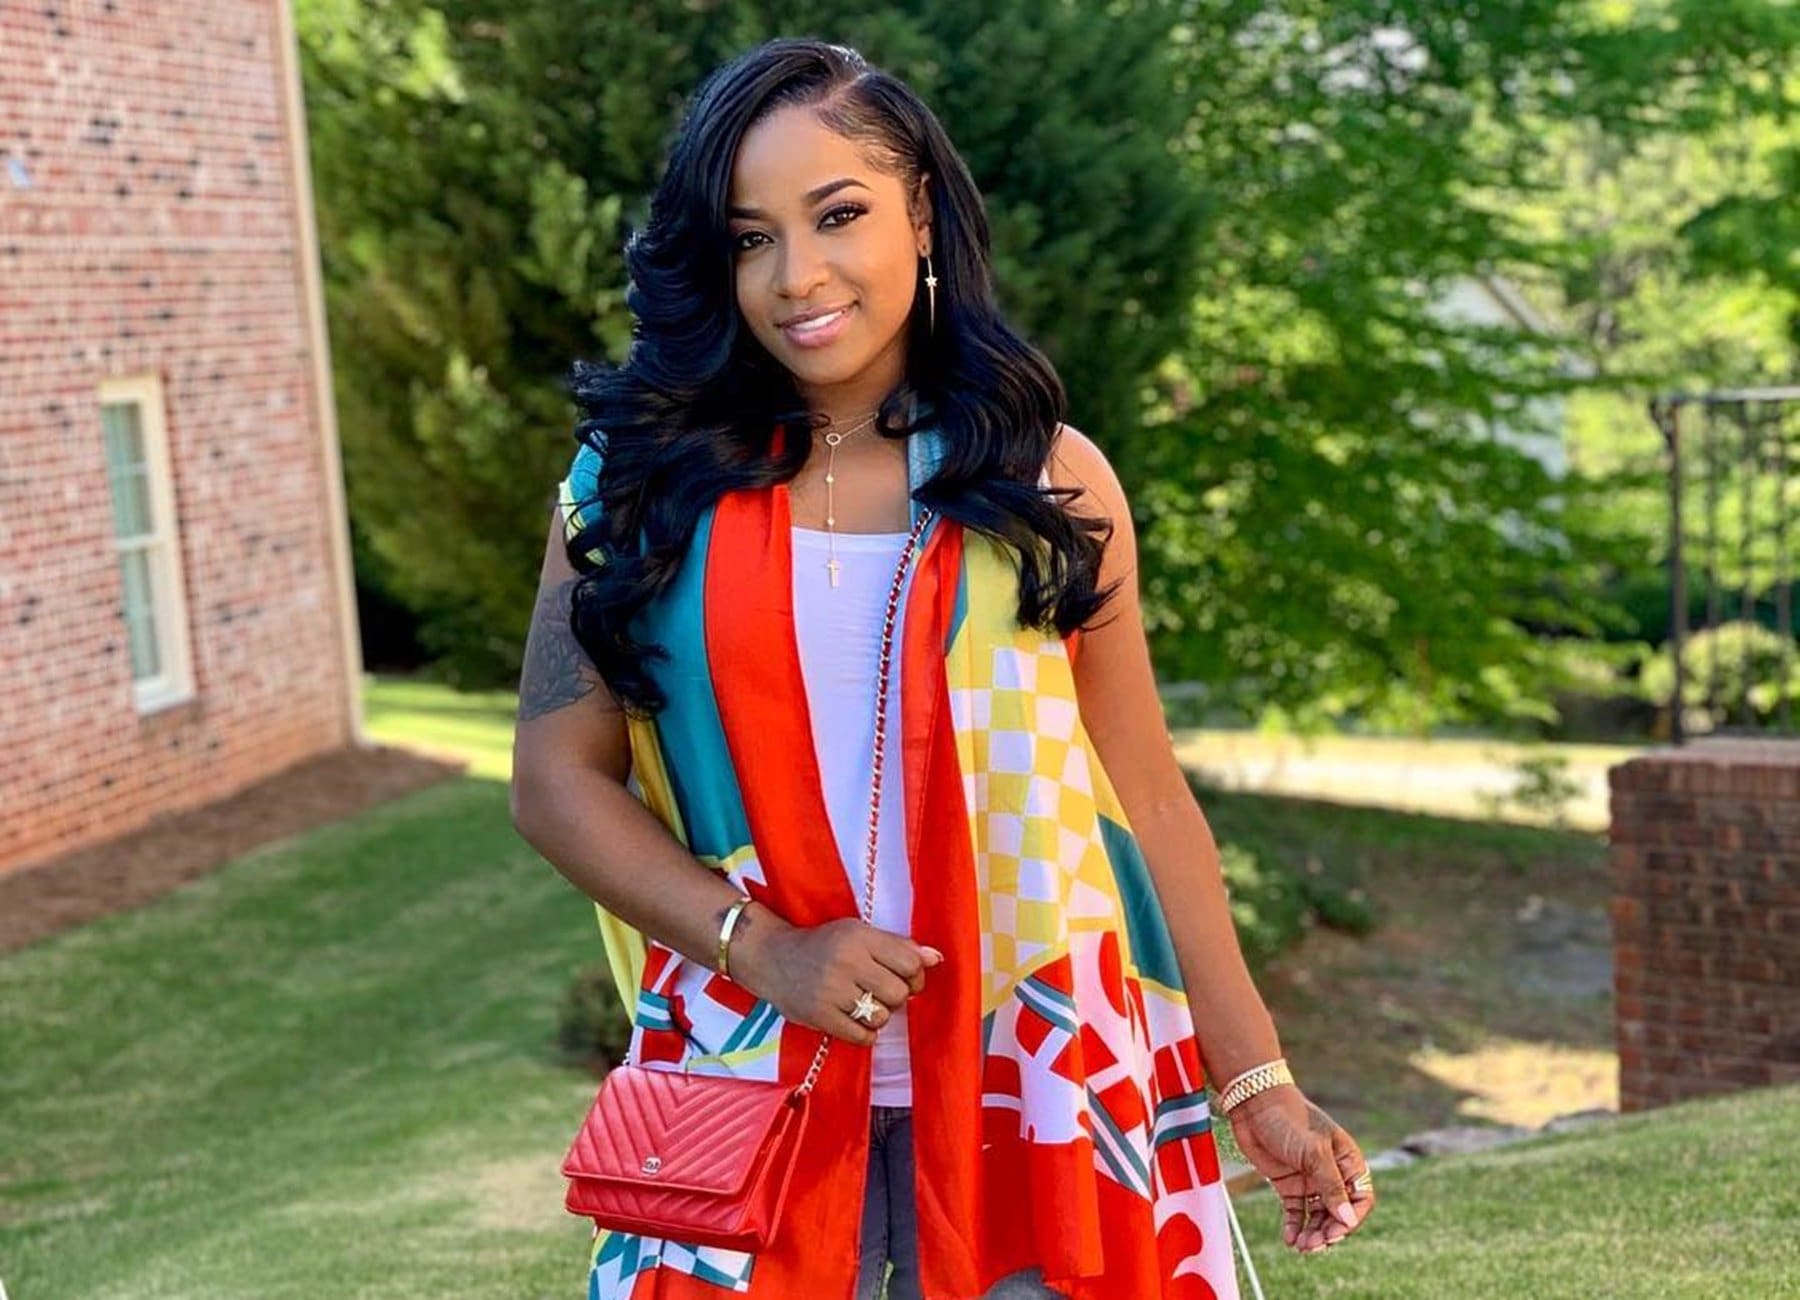 Toya Johnson Is Dreaming Of A Vacay - See Her Sweet Pics From Her Last Trip